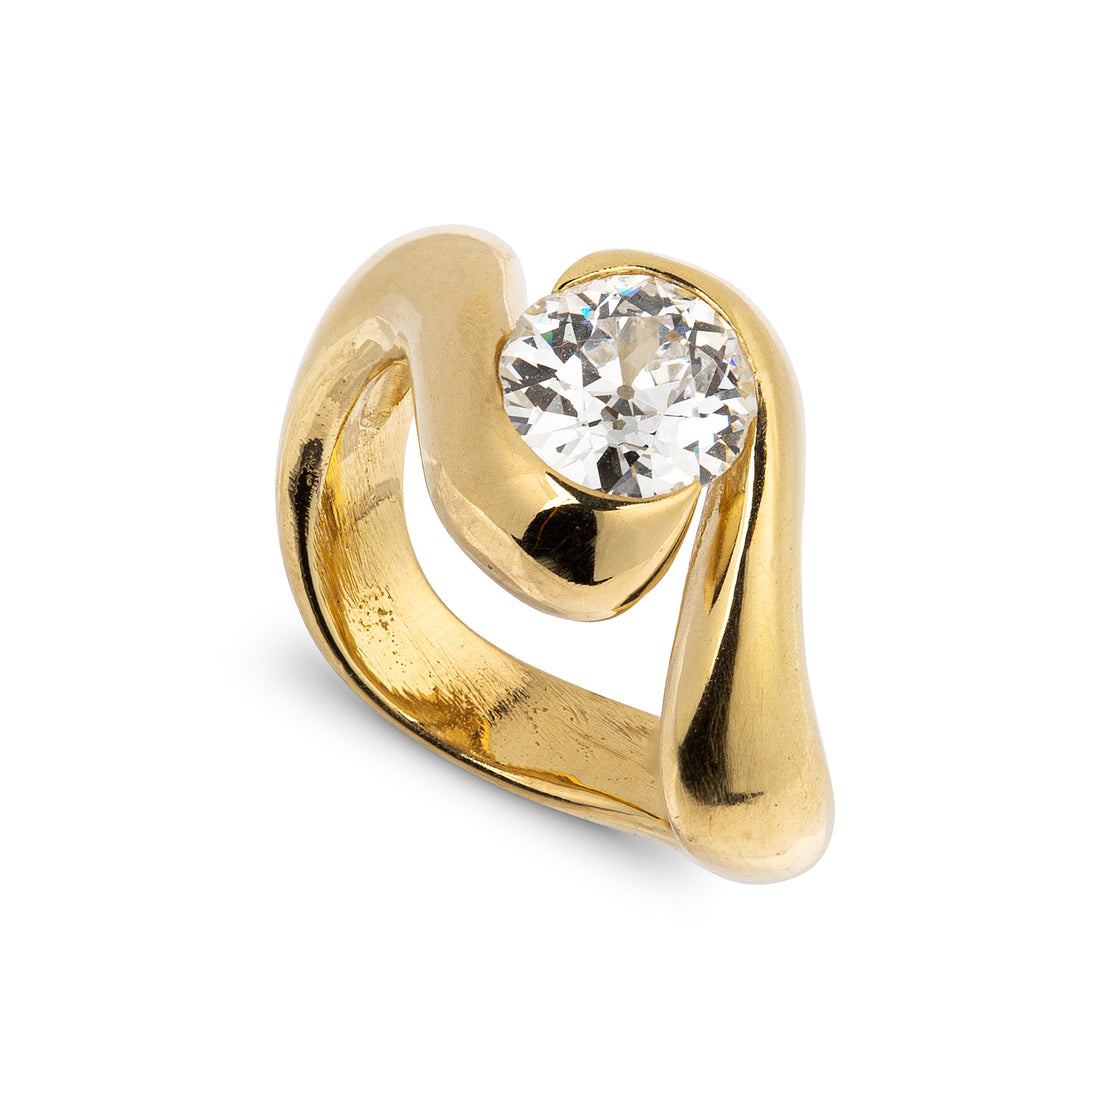  Tension Set Crossover Diamond Ring by Jessie Thomas | The Cut London